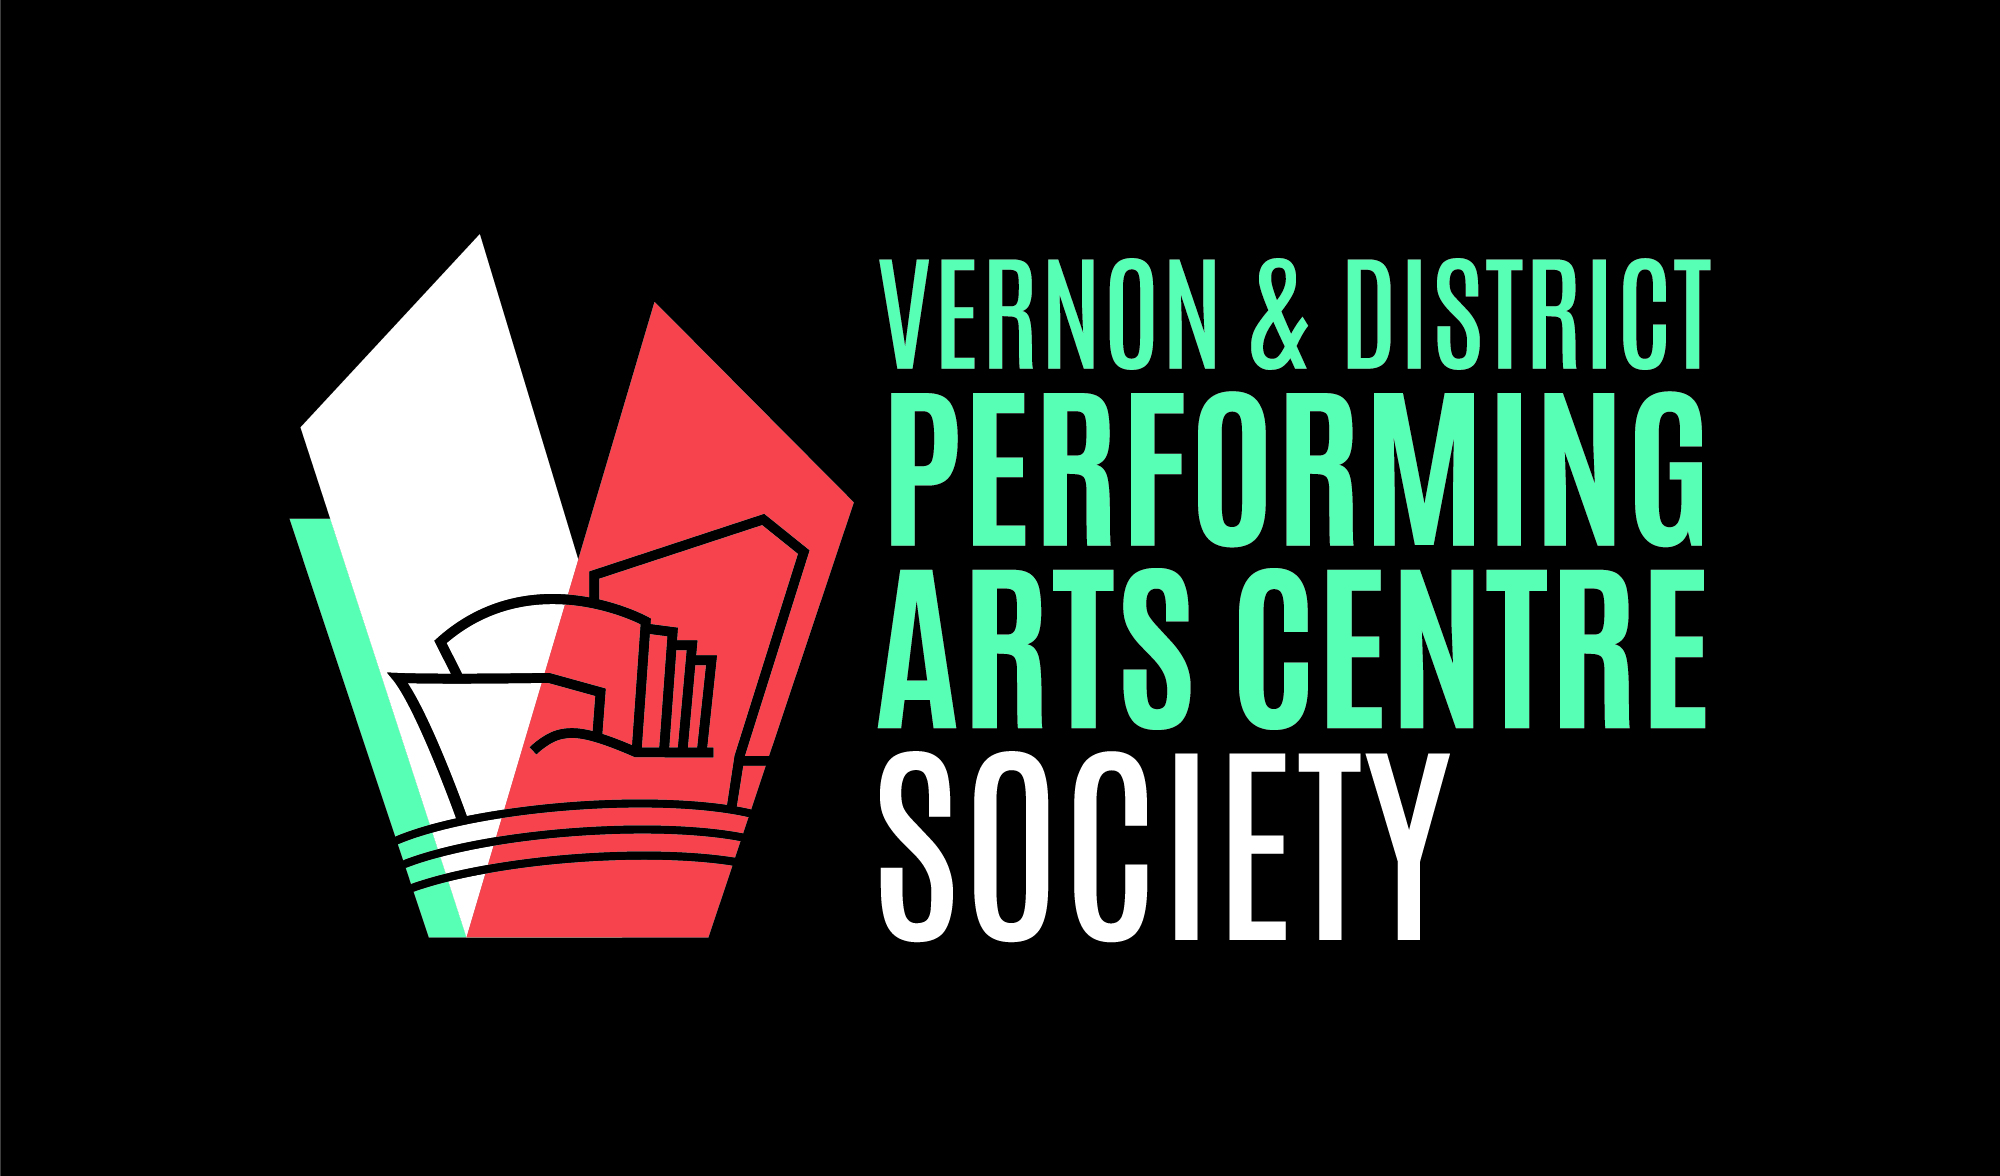 Vernon and District Performing Arts Centre Society